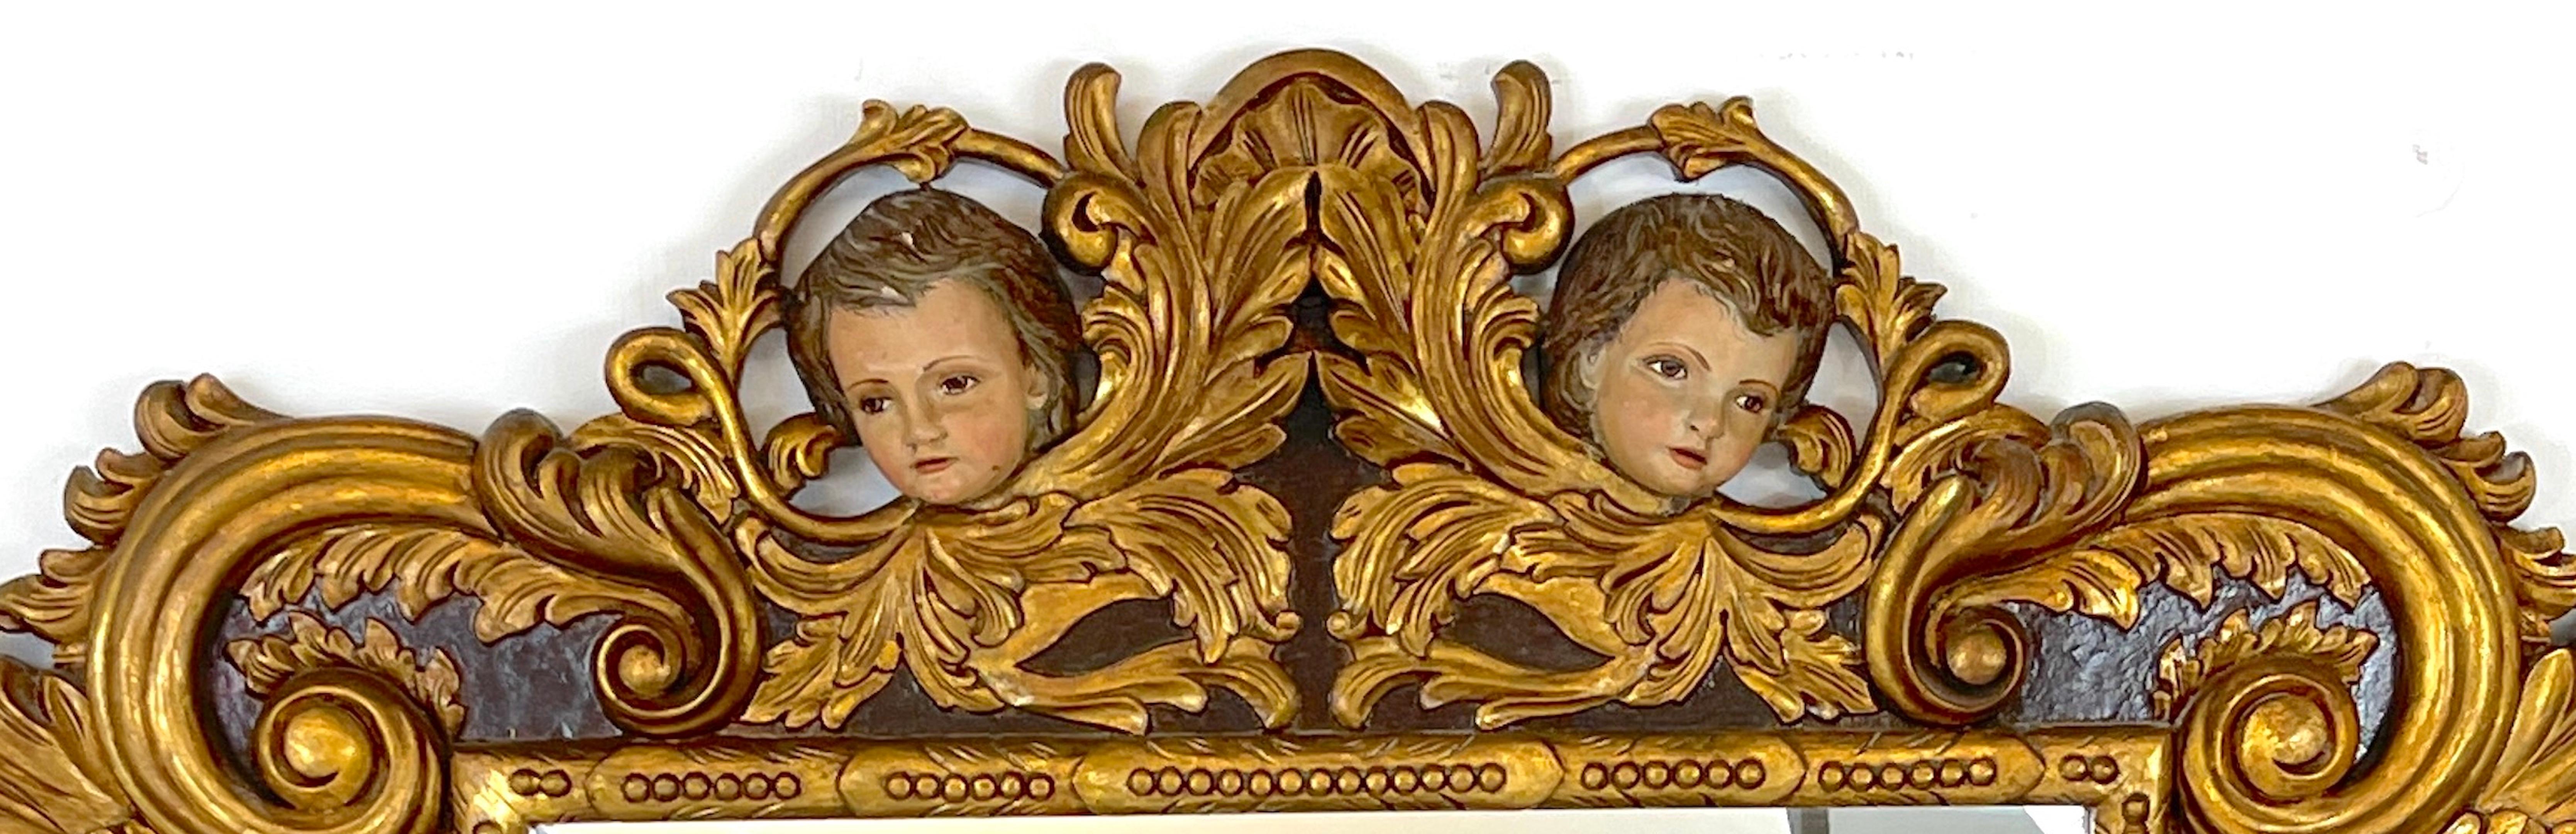 Beveled Palatial Italian Carved Figural Giltwood & Polychromed Baroque Style Mirror For Sale